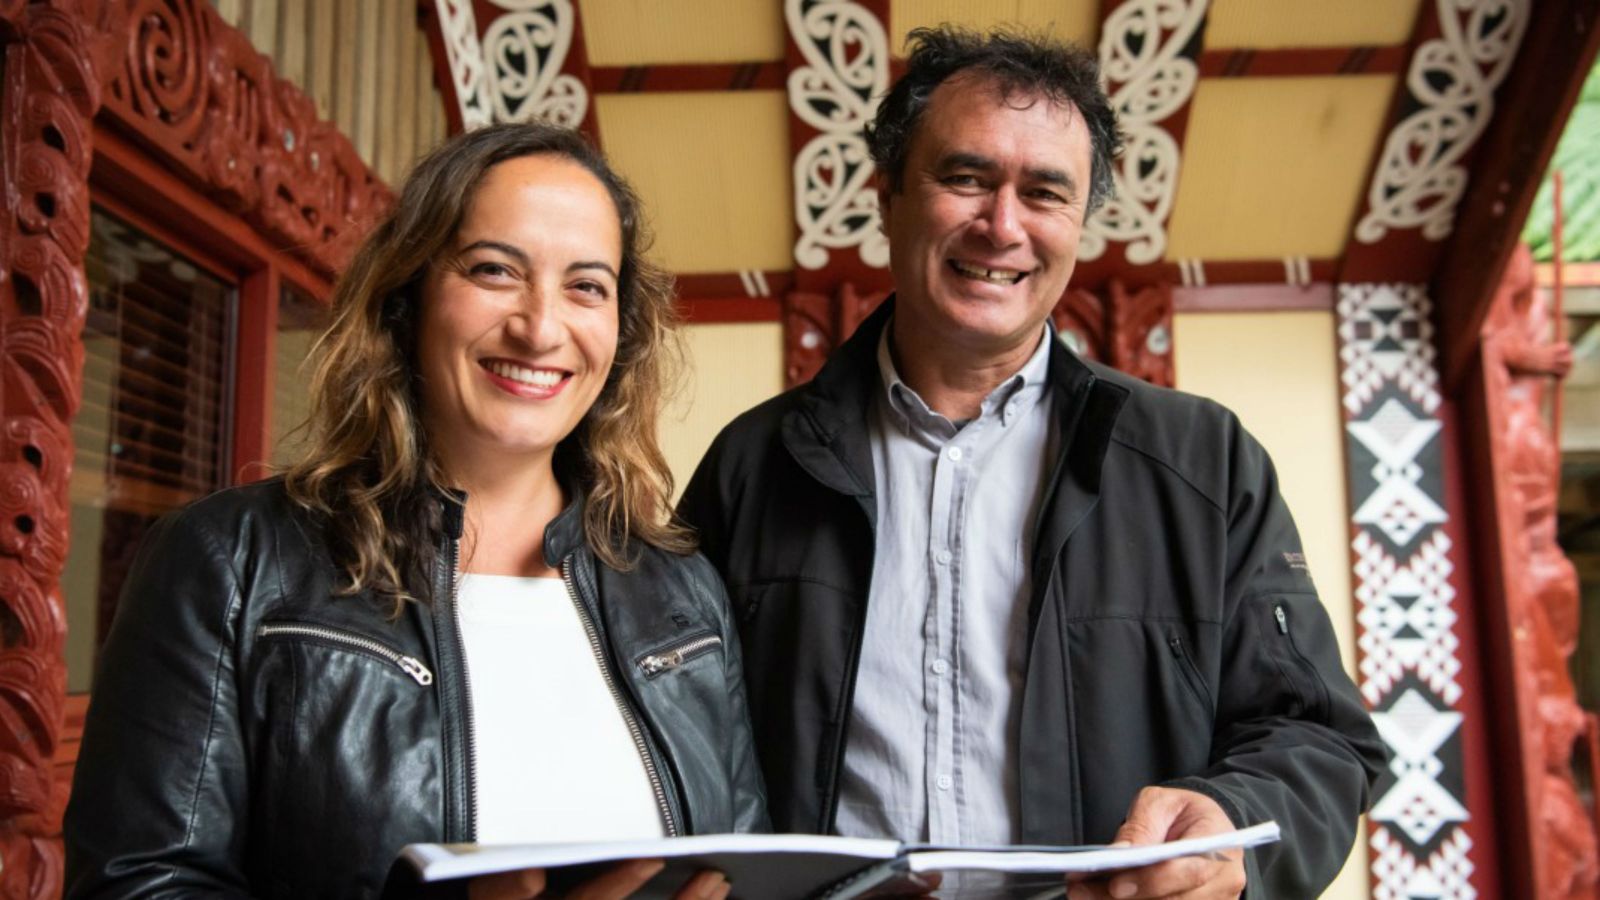 Arini Loader and Mike Ross on Victoria University of Wellington marae with a copy of the waiata at the heart of their research project.